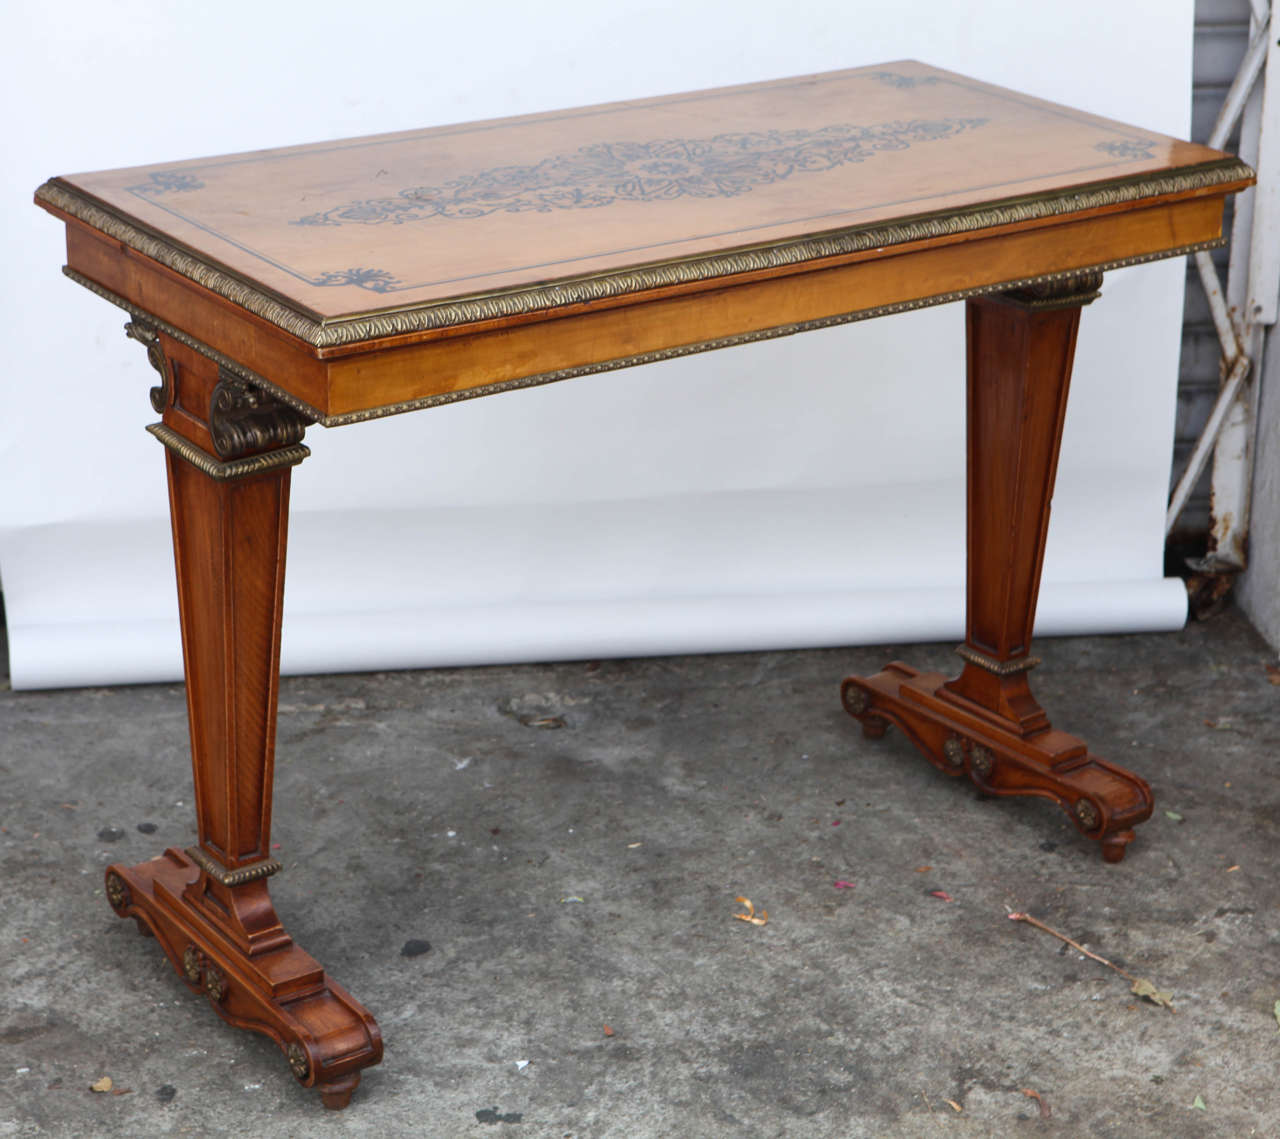 1940's Vintage French Satinwood Console/Sofa Table with Inlay and Bronze Mounts.